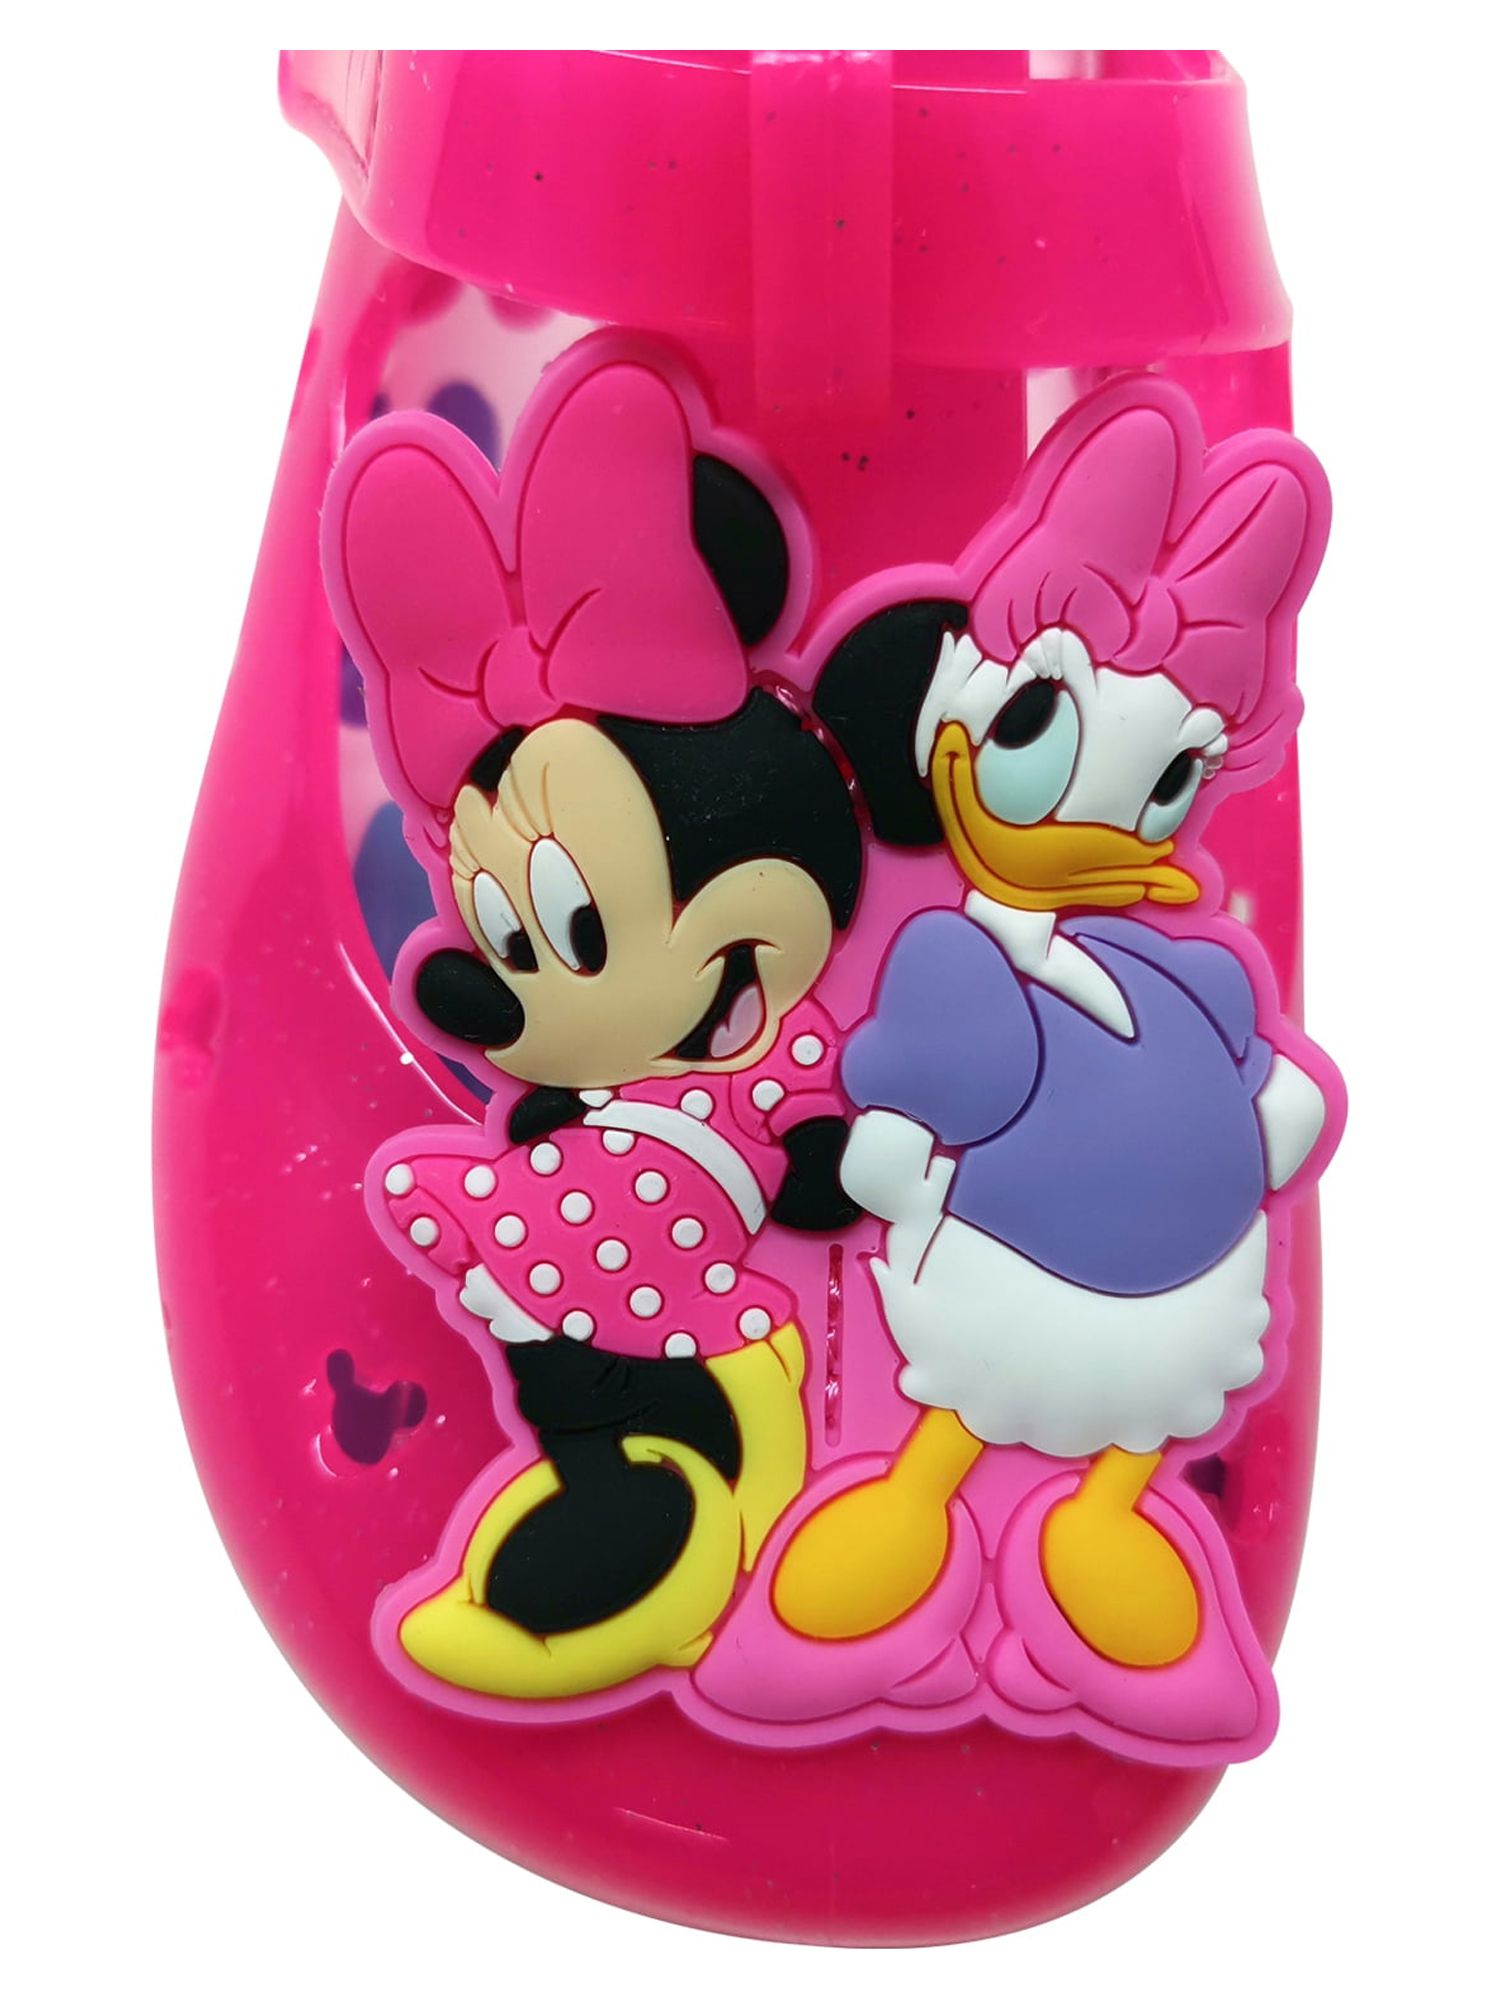 Disney Minnie Mouse & Daisy Duck BFFs Casual Jelly Shoe (Toddler Girls) - image 4 of 7